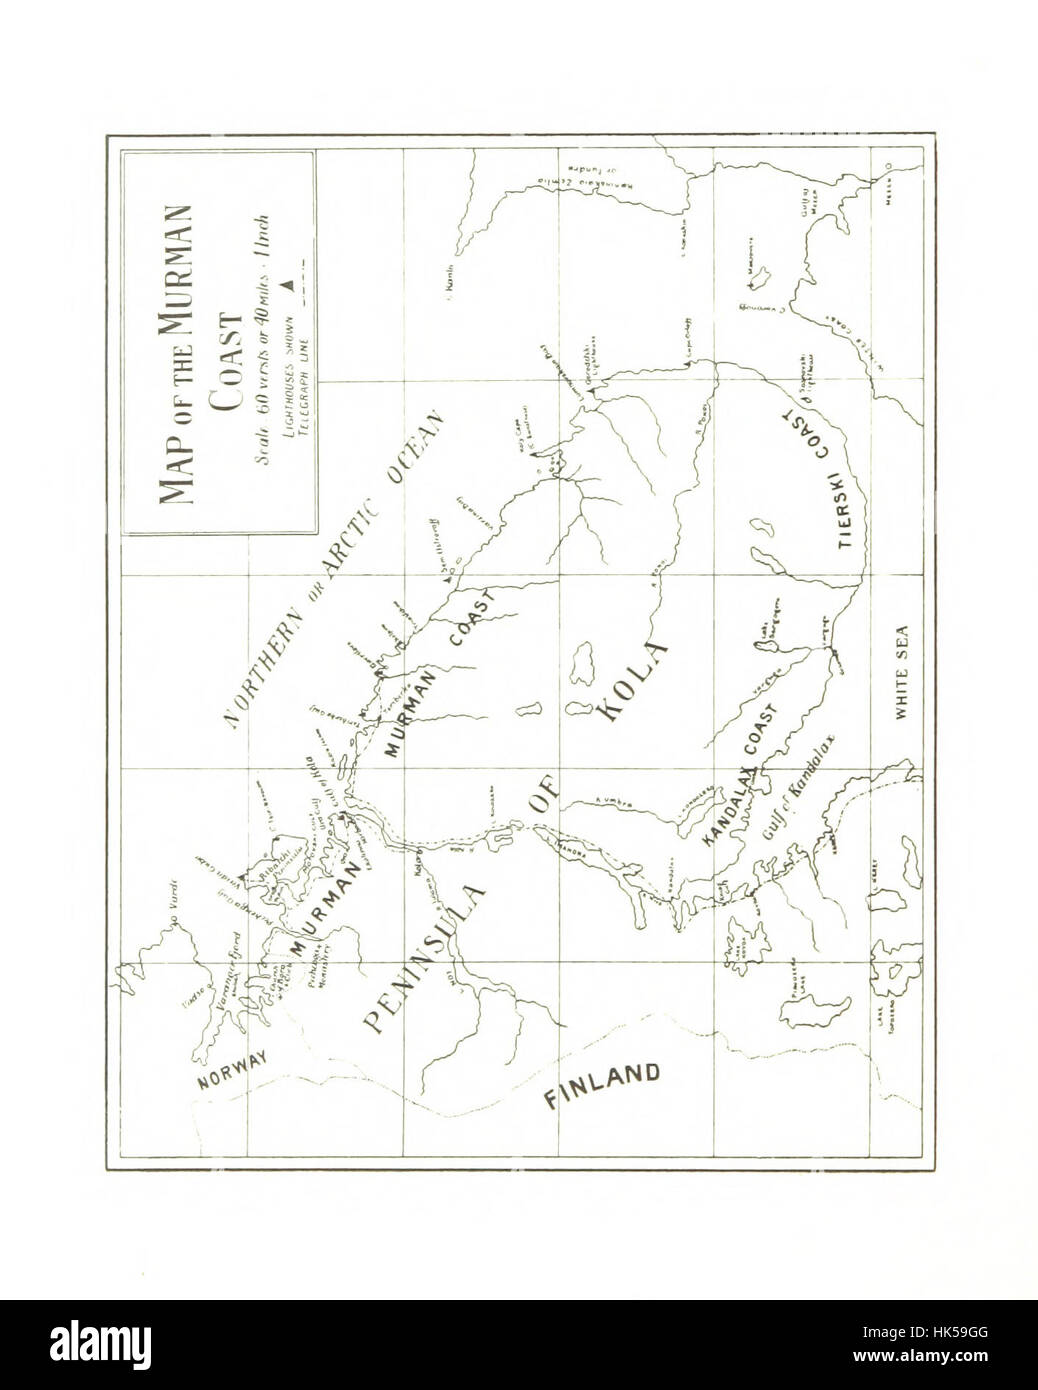 Image taken from page 144 of '[Русскій сѣверъ. Путевыя записки.] A Russian Province of the North ... Translated from the Russian by H. Cooke. With illustrations ... and three maps' Image taken from page 144 of '[Русскій сѣверъ Путевыя з� Stock Photo